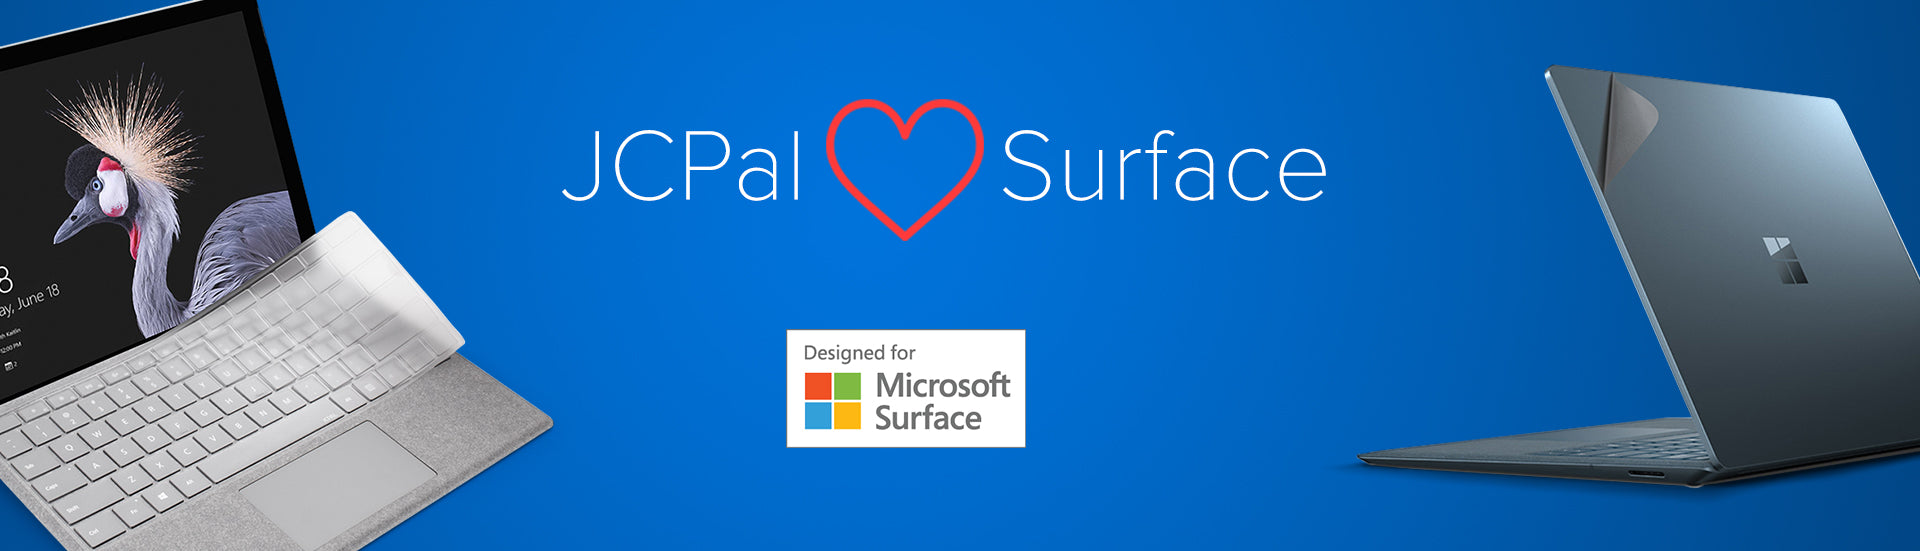 Licensed Microsoft Designed for Surface accessories partner